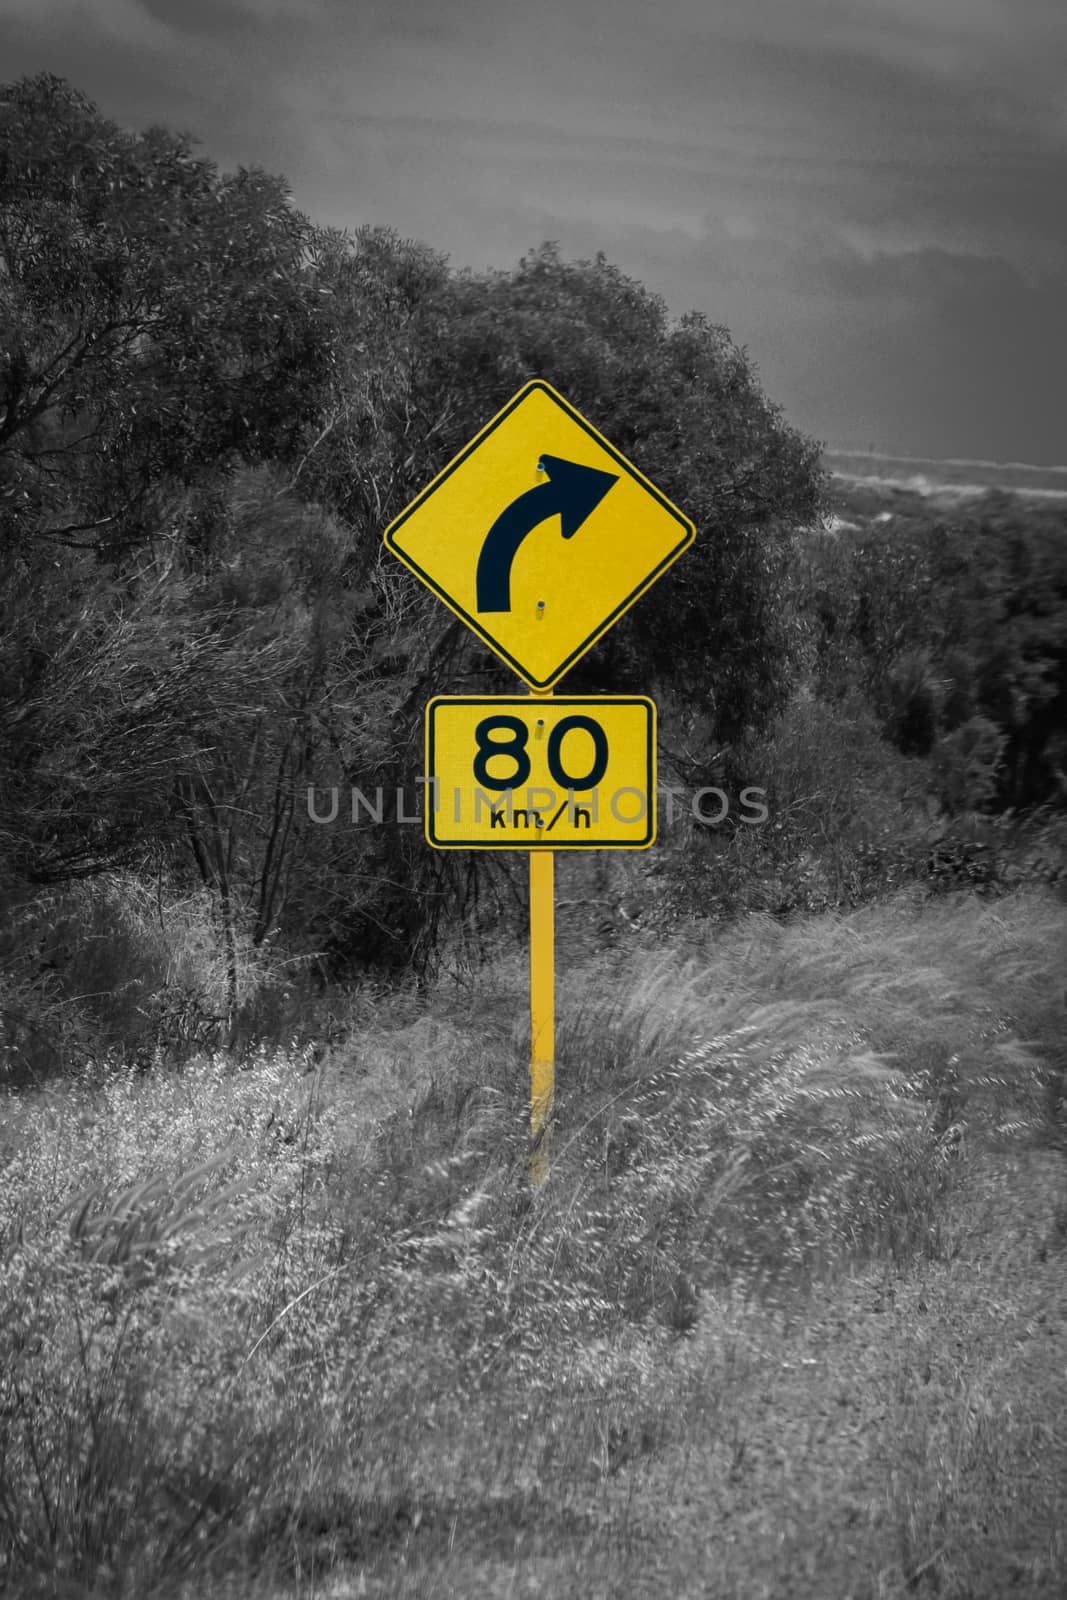 Street sign in Australia warning right curve ahead speed 80 in black and white with yellow accent color